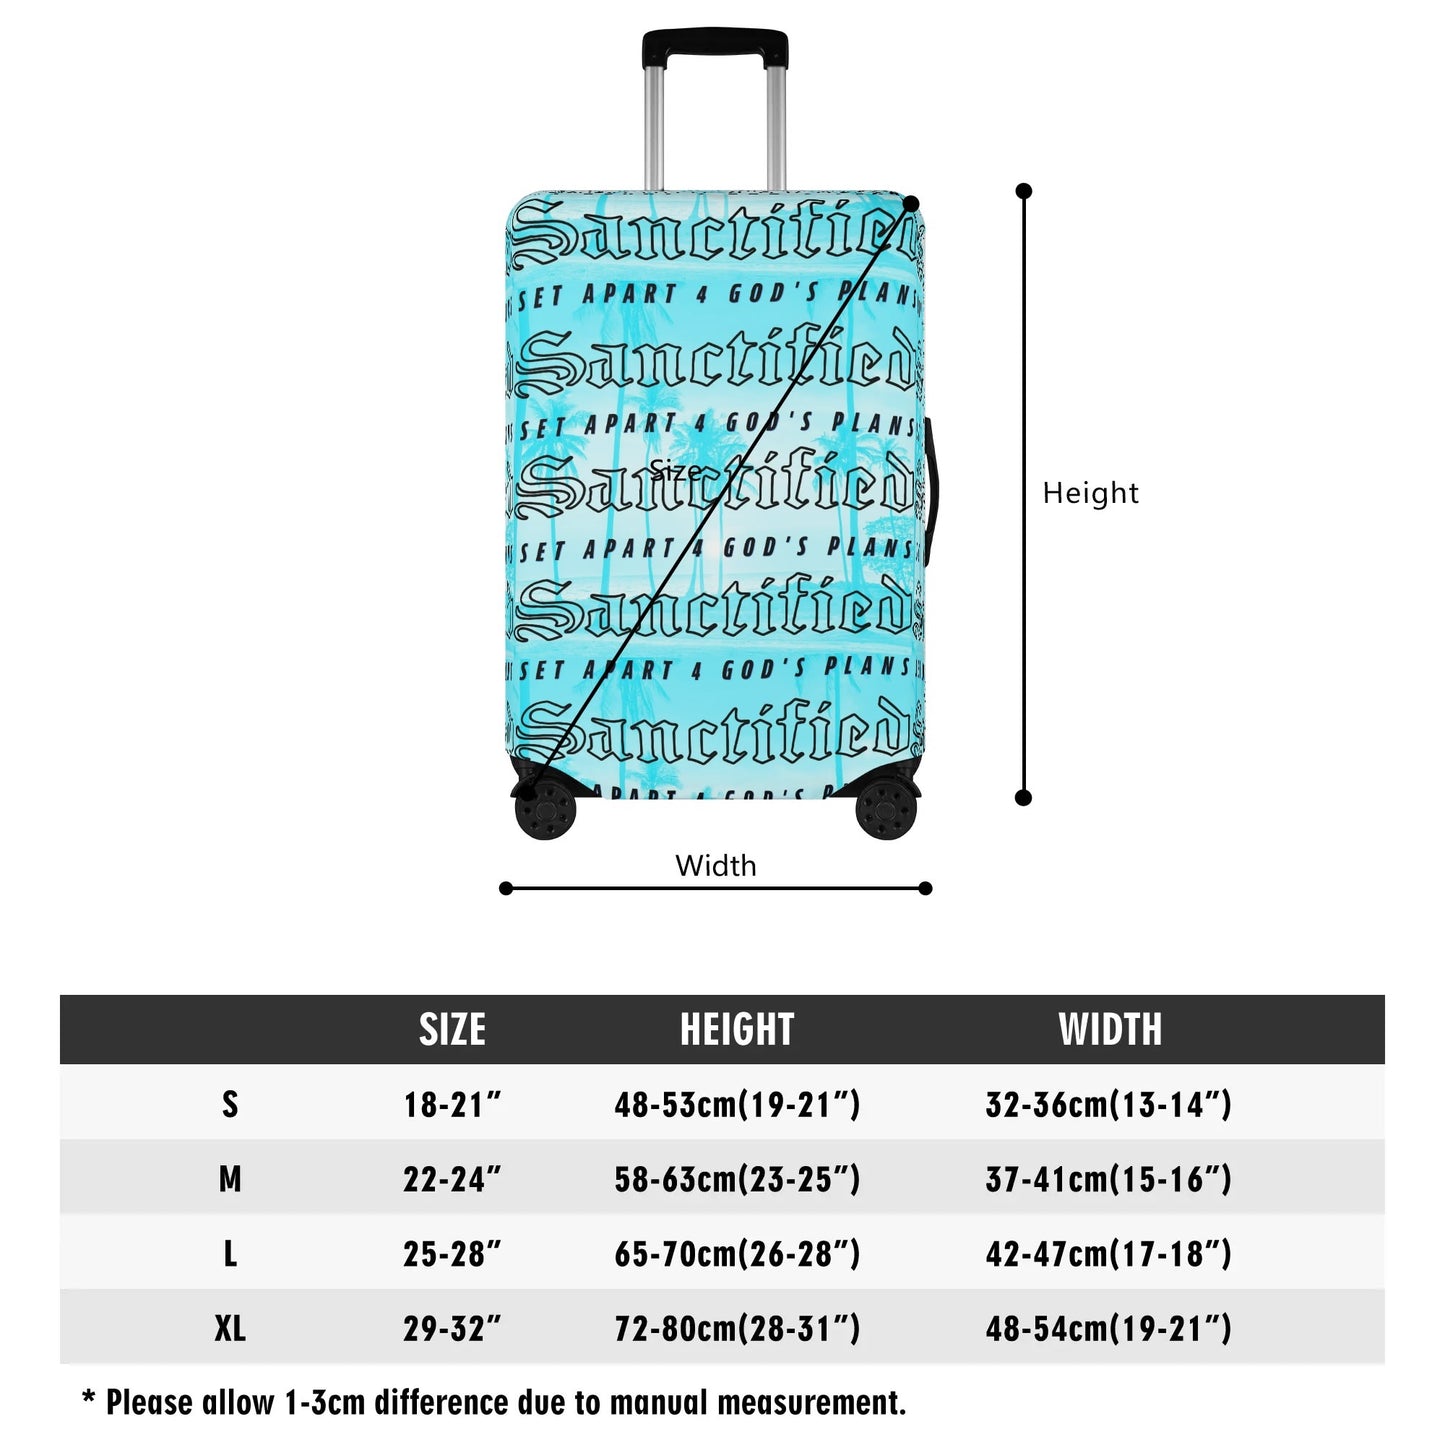 SANCTIFIED- Polyester Luggage Cover, FREE SHIPPING